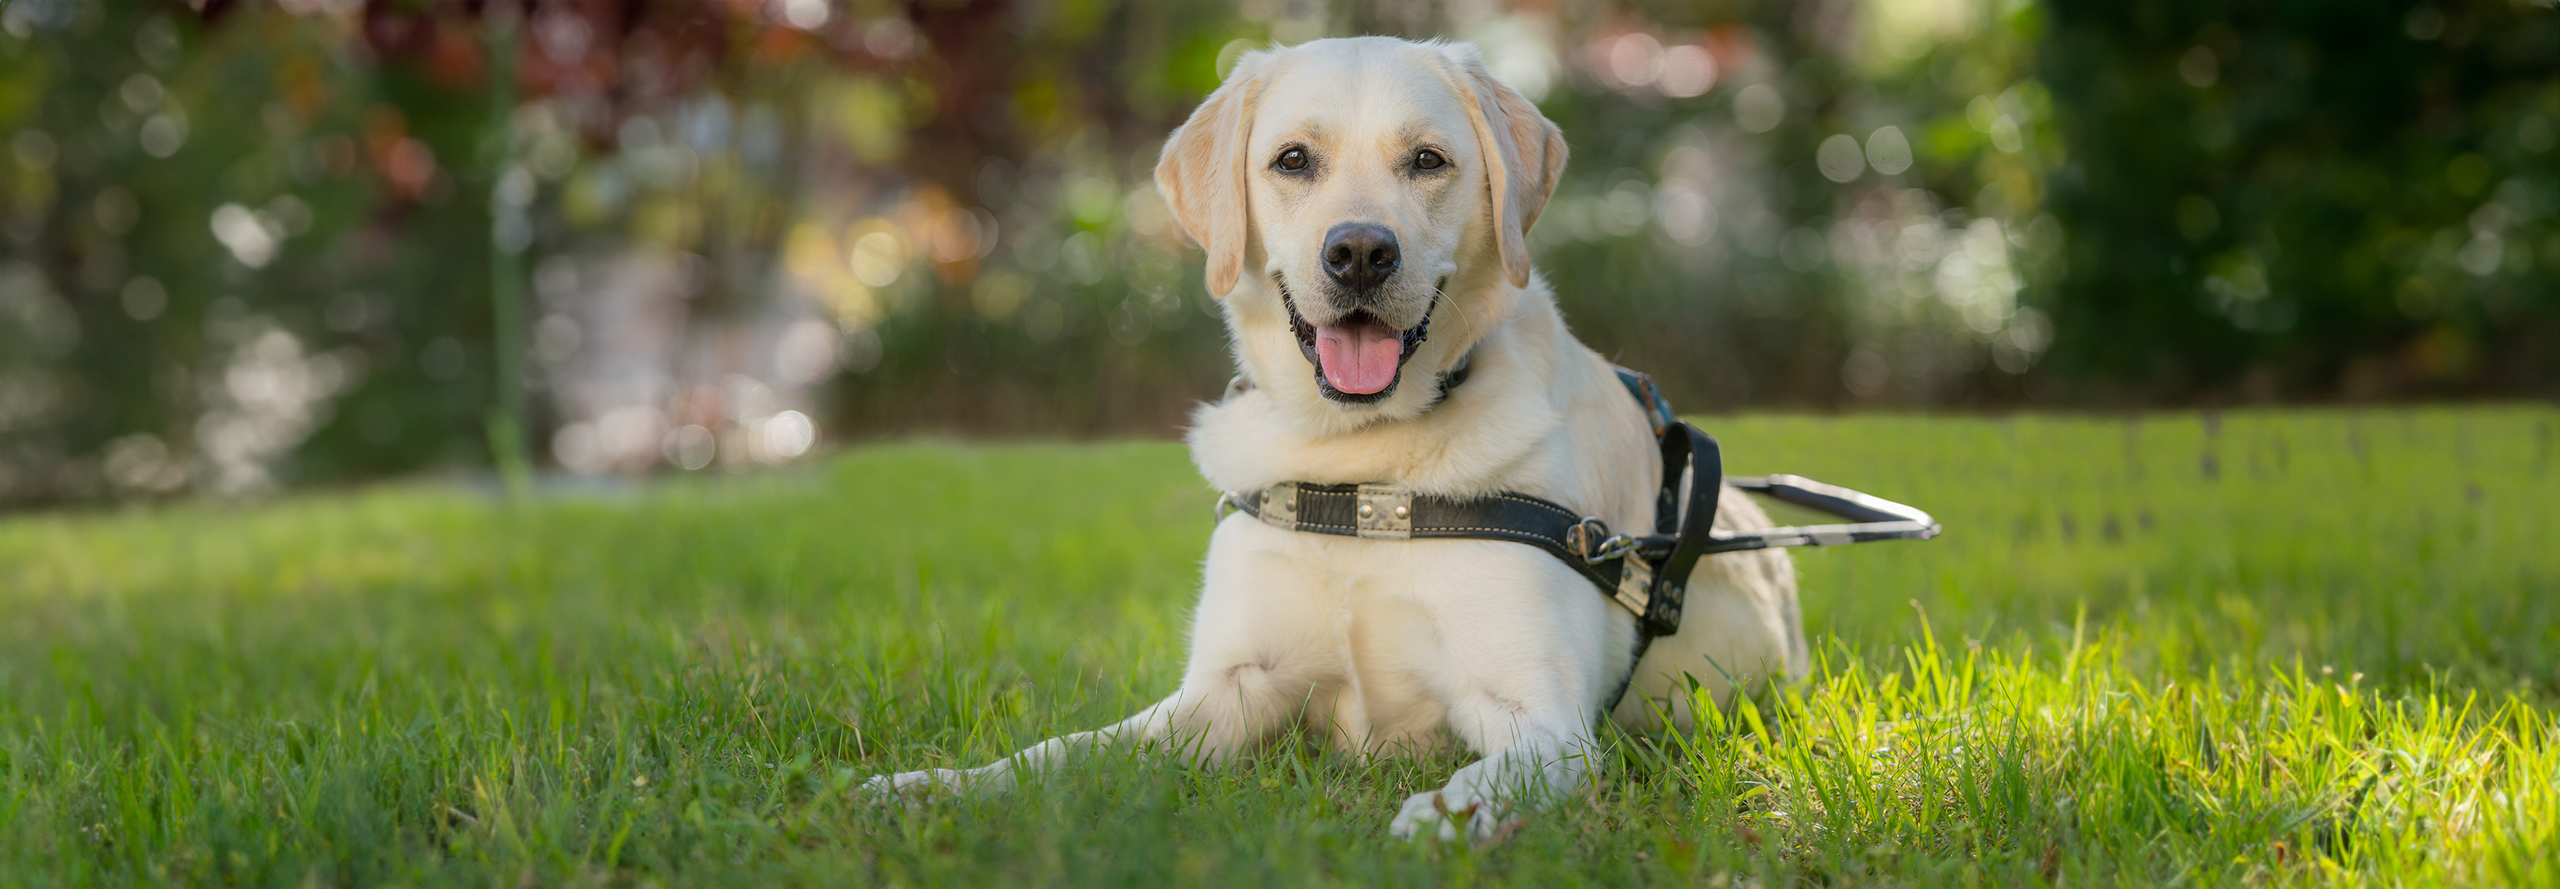 Service Dog Access: Know the Rules and Your Rights - Southeastern Guide Dogs  Inc